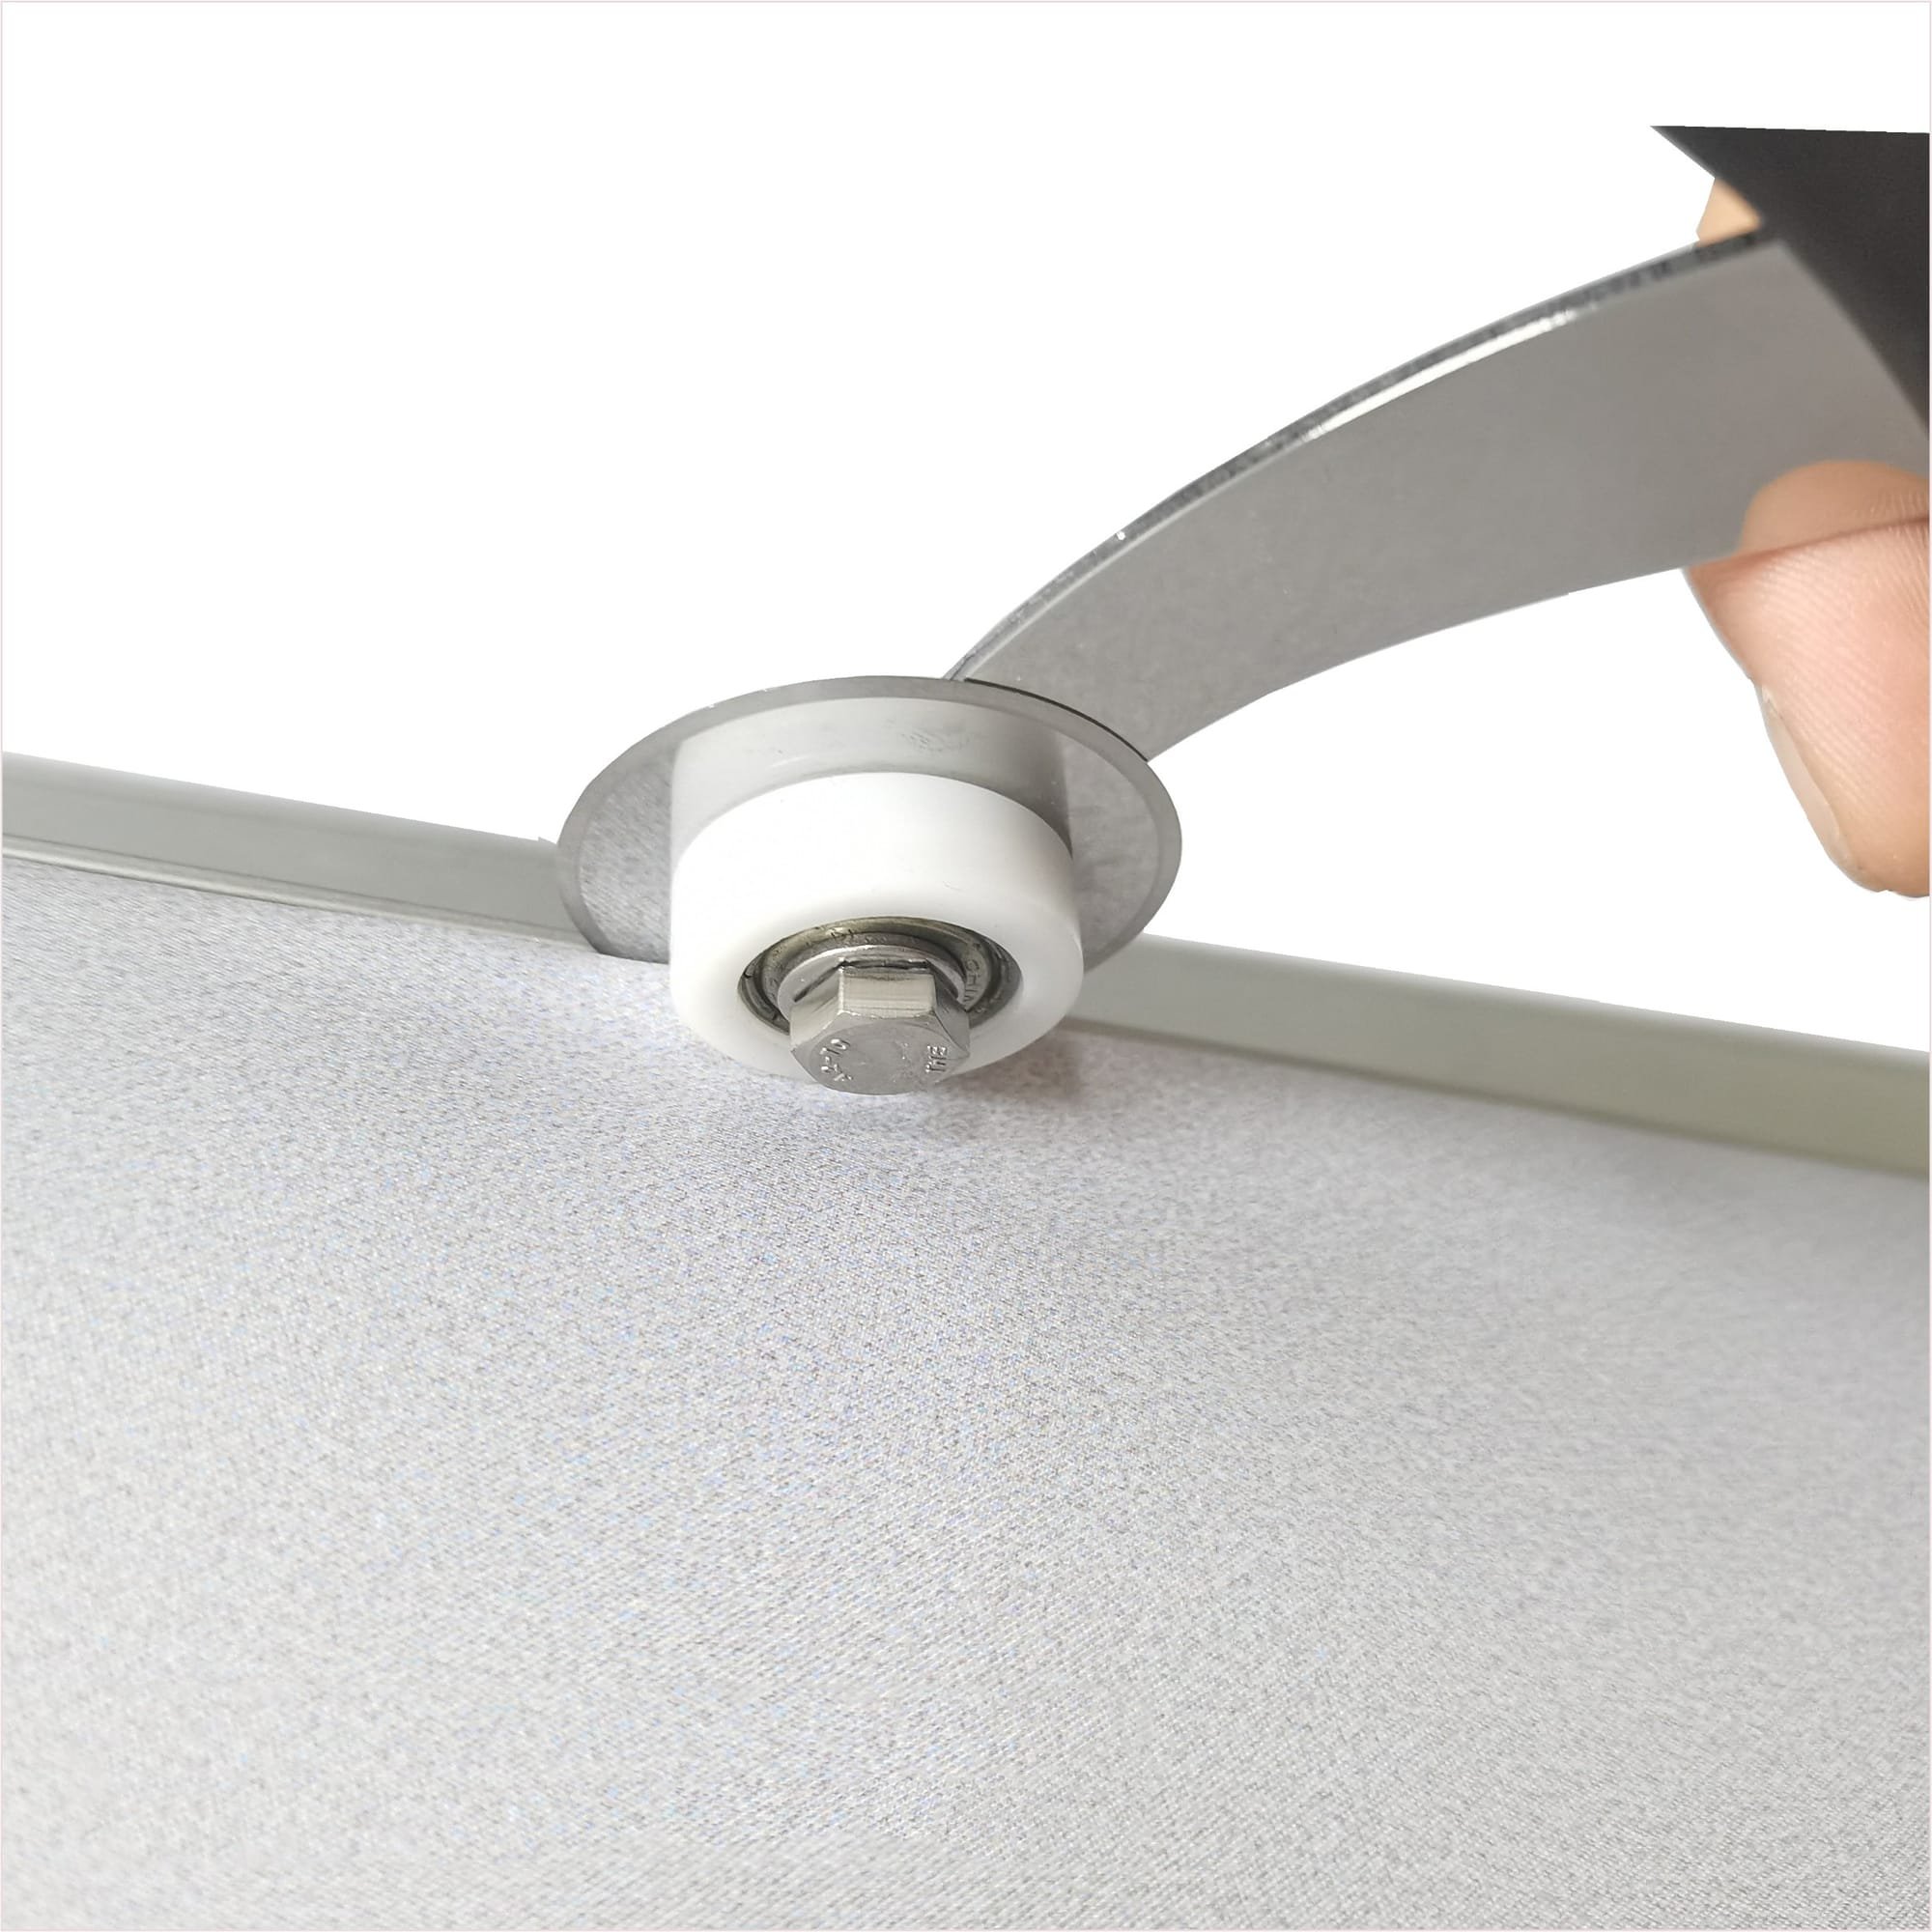 Easy to use Foxygen SEG Stretch Ceiling Film Installation Accessories Light Box Tools